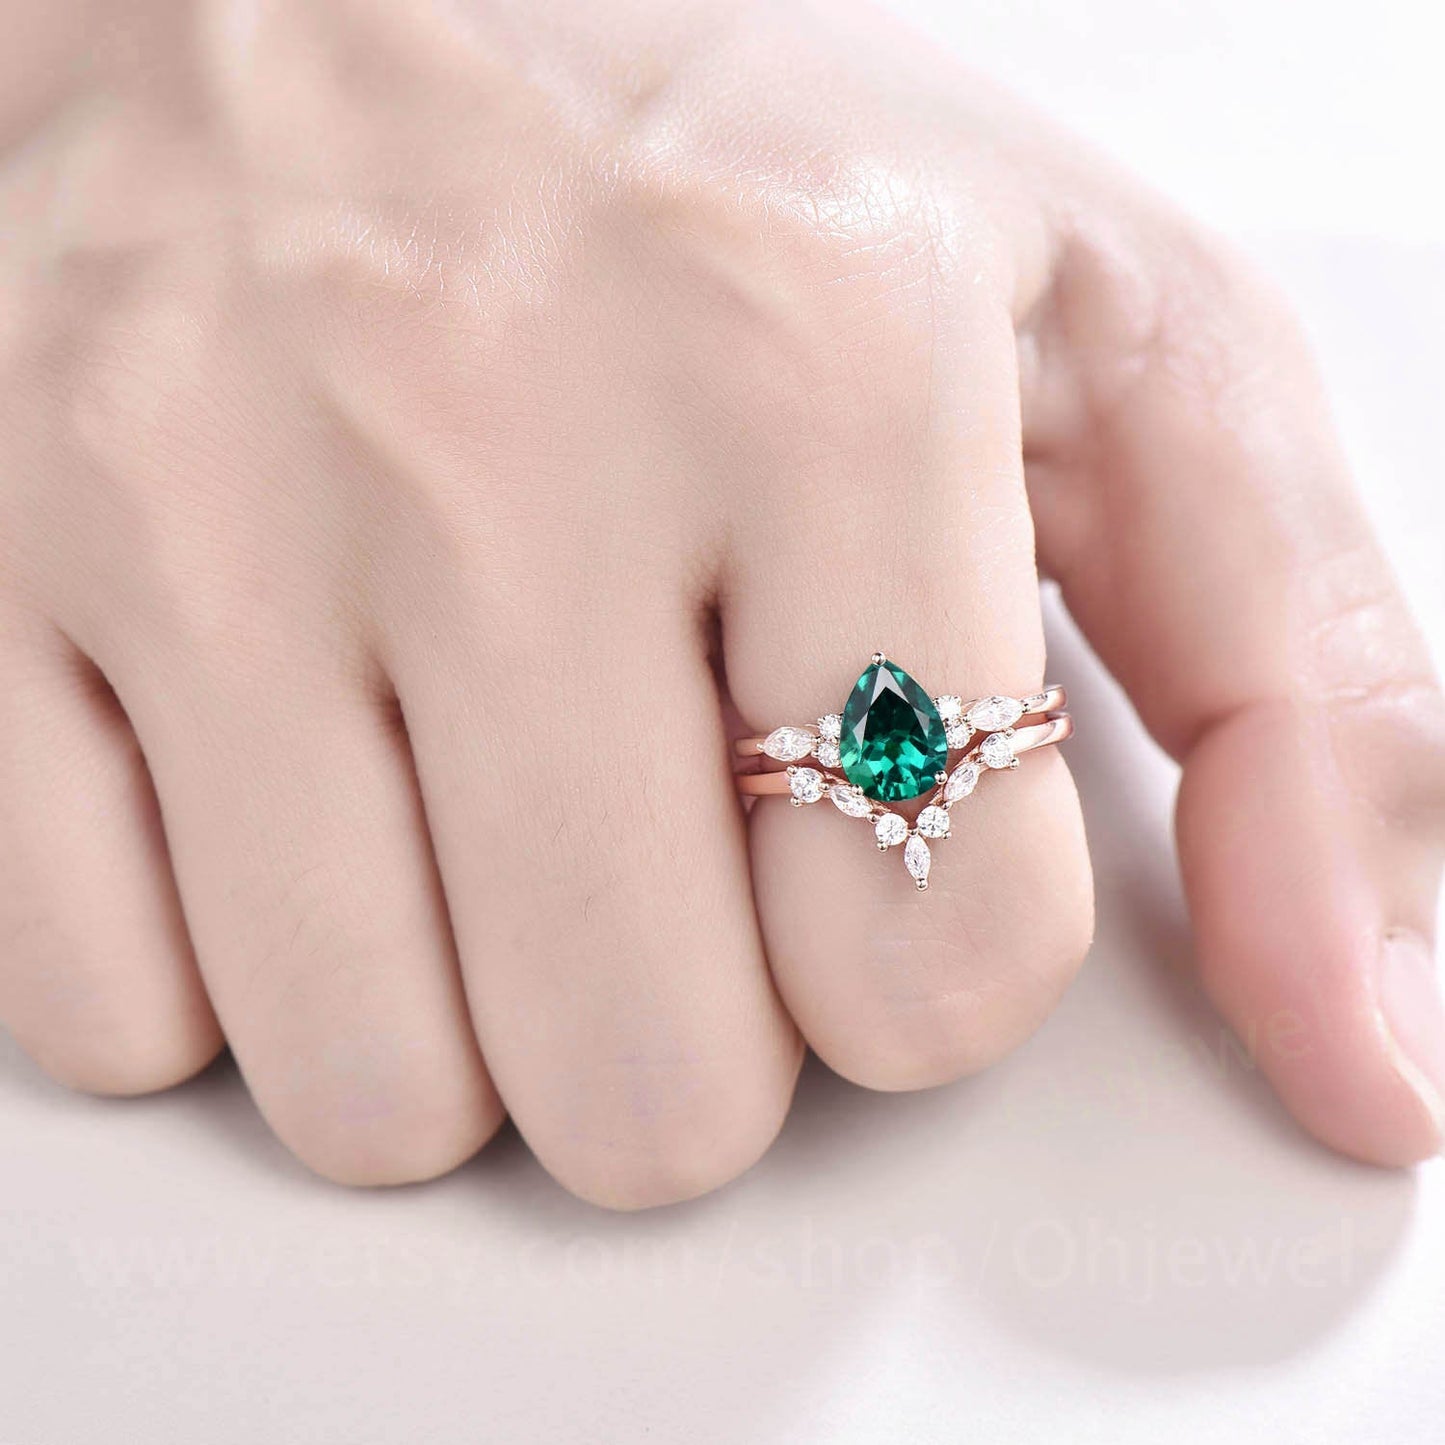 Pear shaped emerald ring gold silver vintage emerald engagement ring set art deco rose gold ring women unique moissanite promise ring set